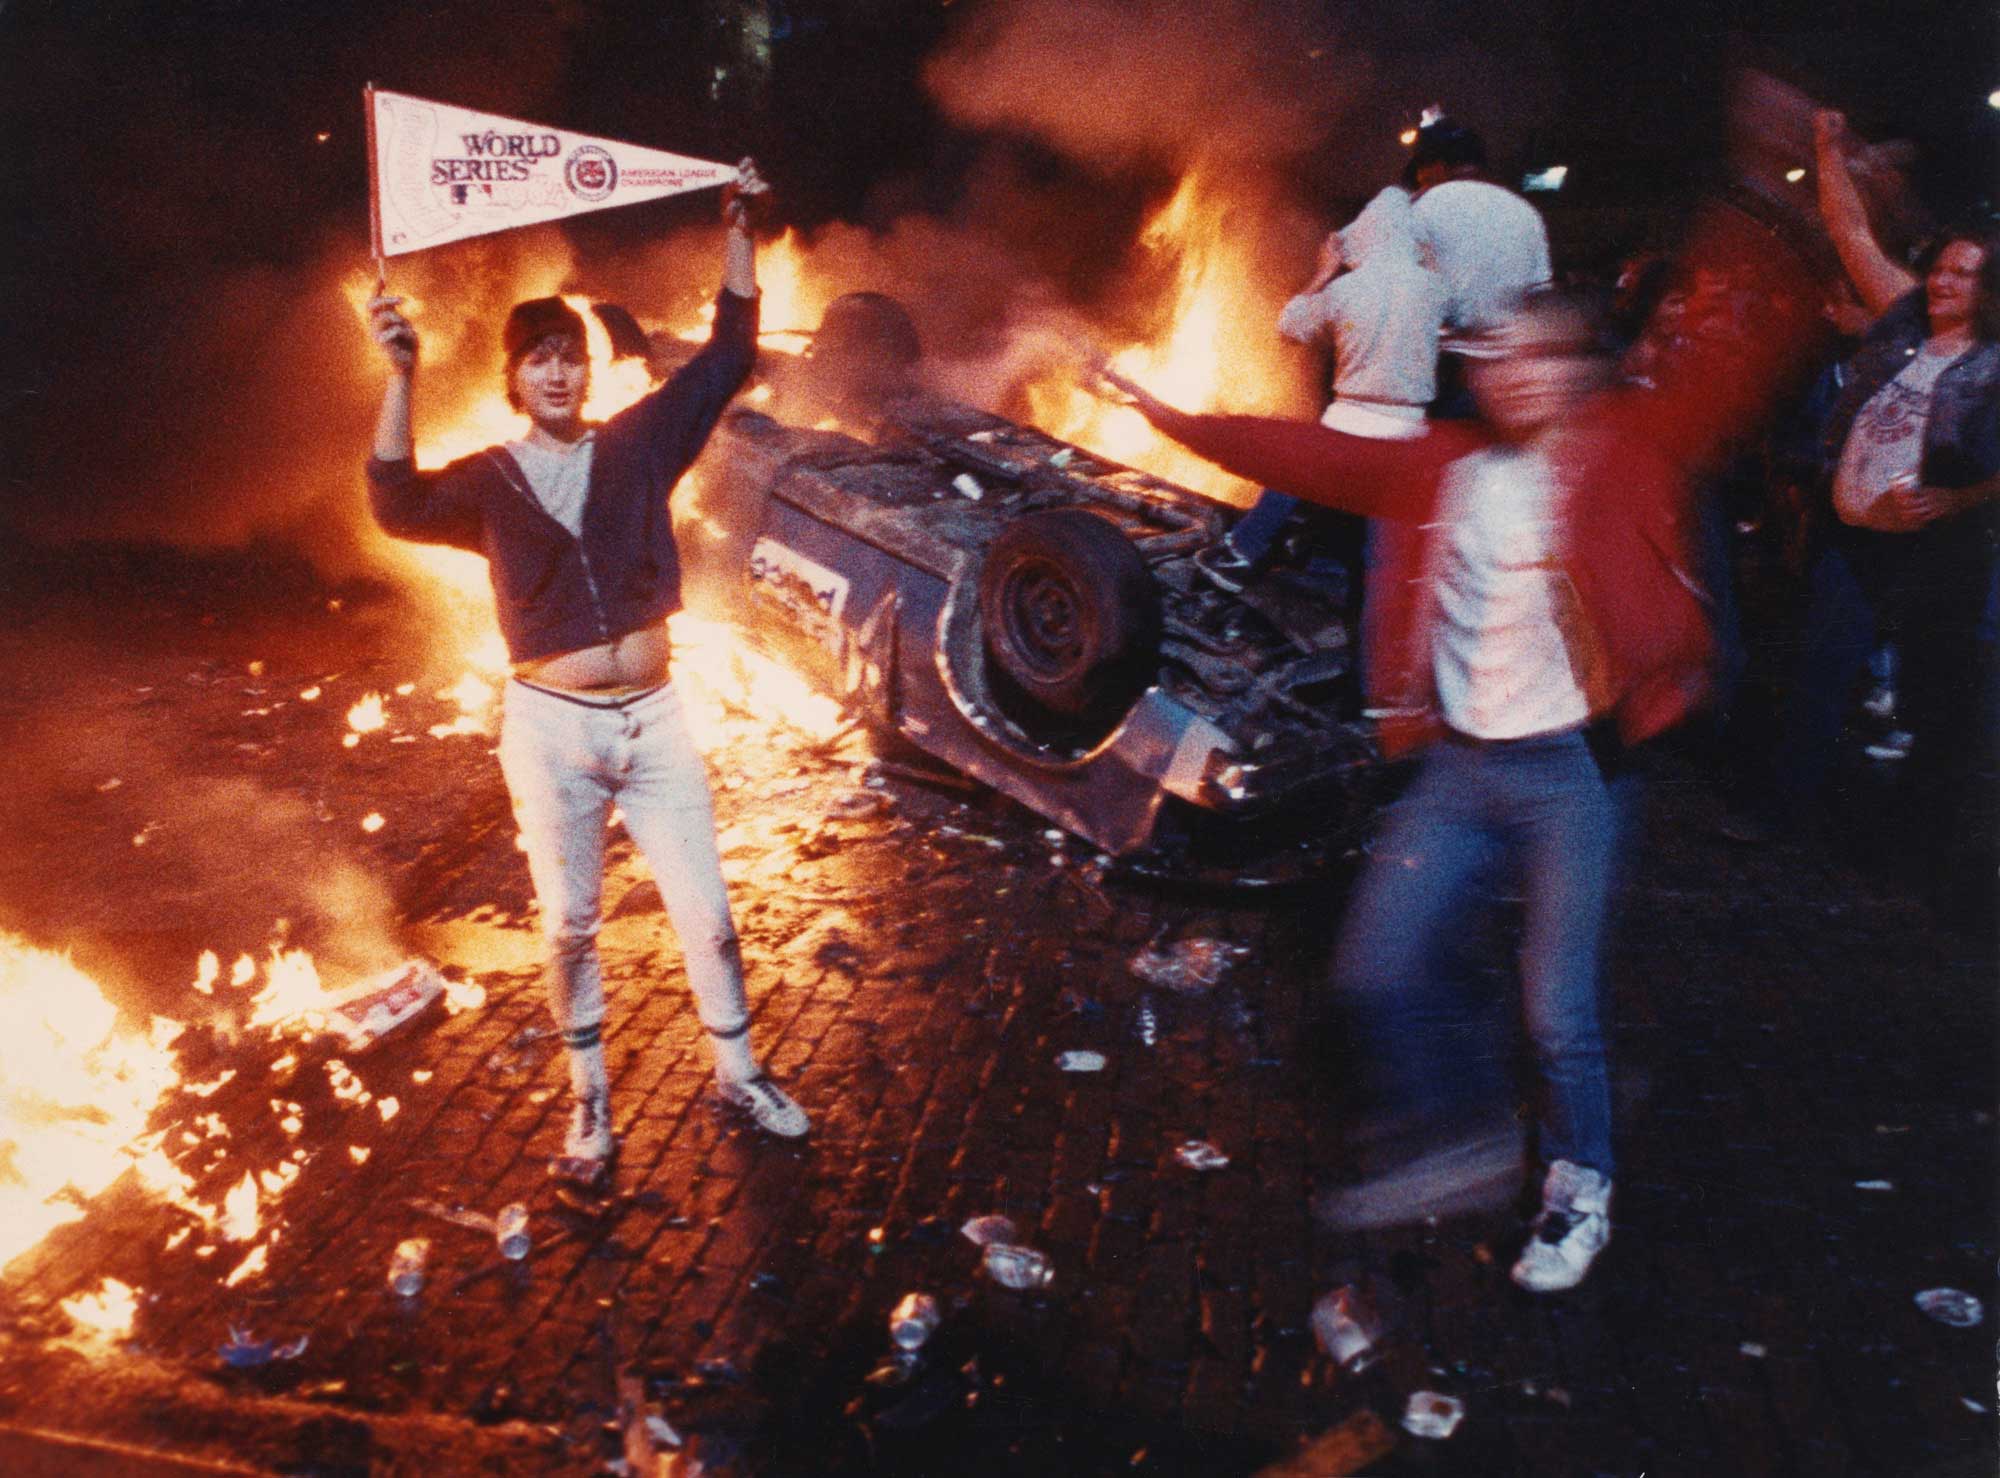 Bubba Helms, left, celebrates after the Detroit Tigers won the 1984 World Series in Detroit in 1984. Detroit erupted into chaos in 1984, following the Tigers' World Series victory over the San Diego Padres.